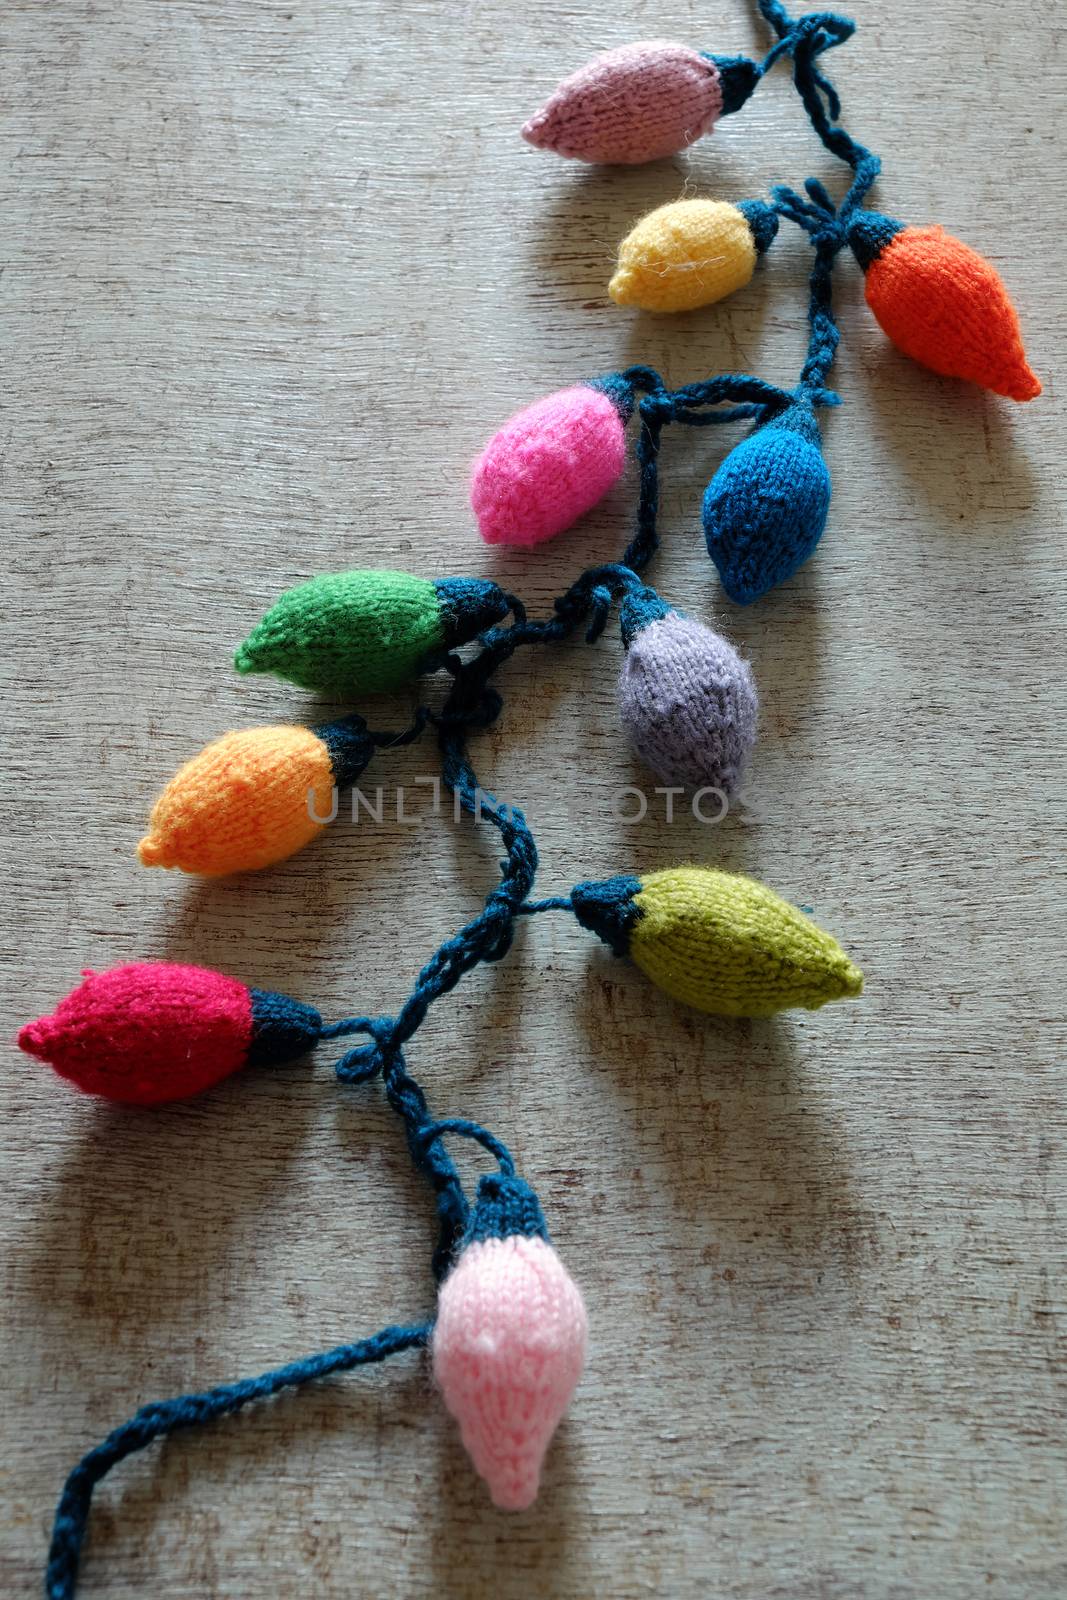 Xmas ornament,  knitted Christmas lights by xuanhuongho